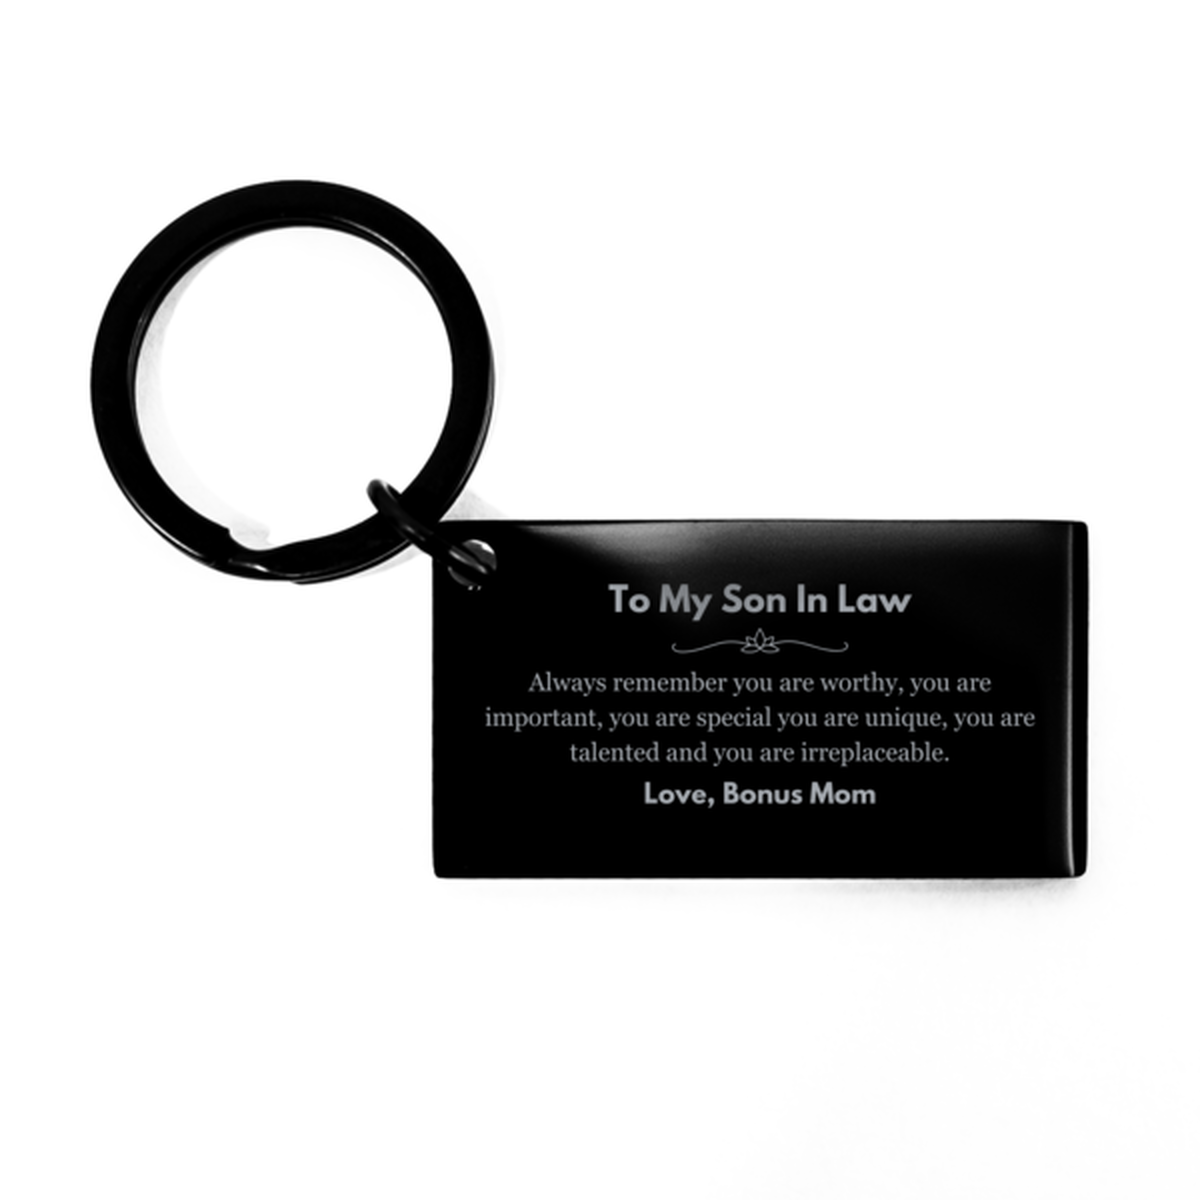 Son In Law Birthday Gifts from Bonus Mom, Inspirational Keychain for Son In Law Christmas Graduation Gifts for Son In Law Always remember you are worthy, you are important. Love, Bonus Mom